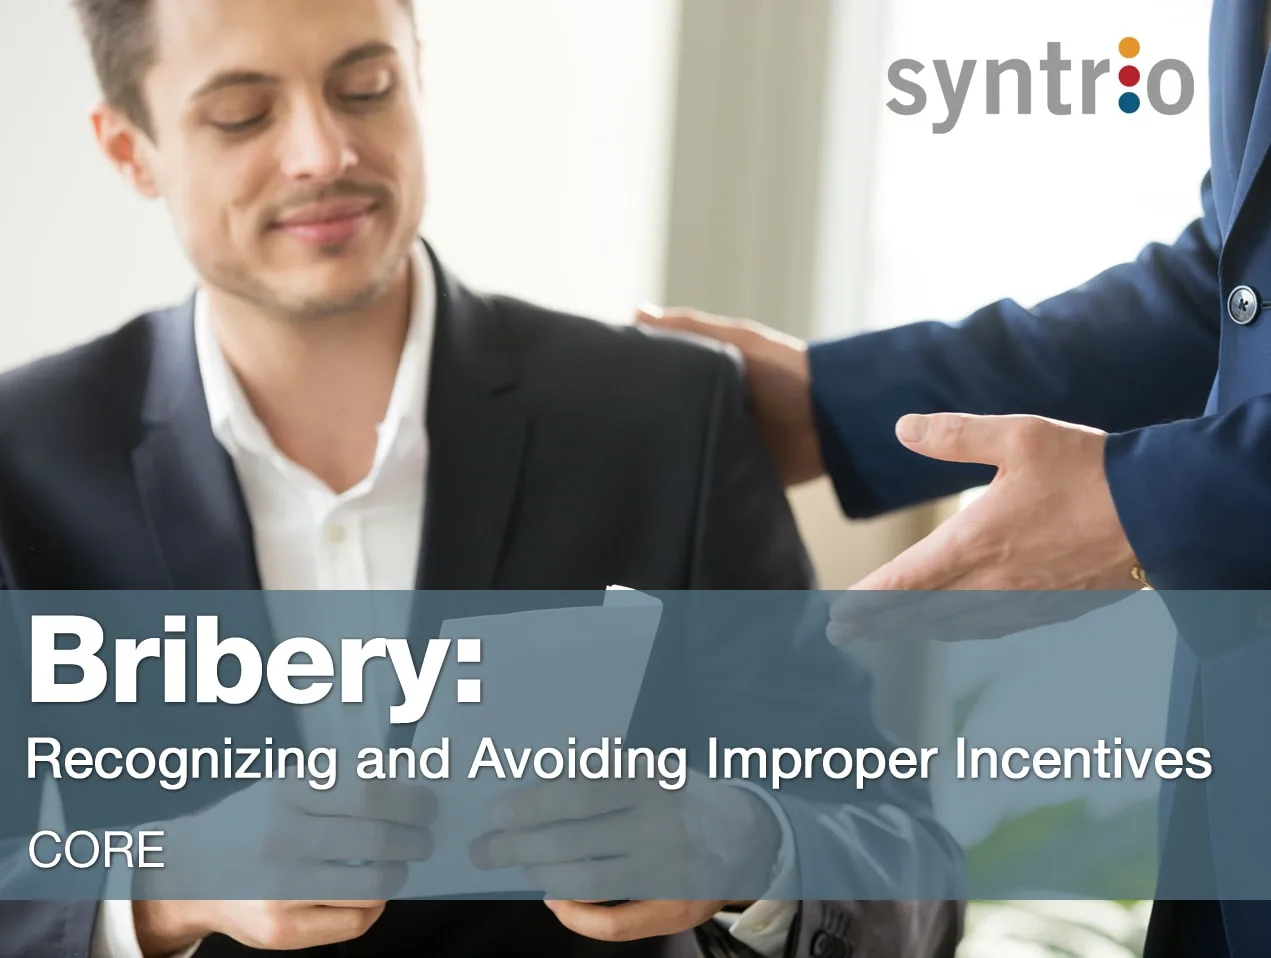 Syntrio - Bribery Recognizing and Avoiding Improper Incentives